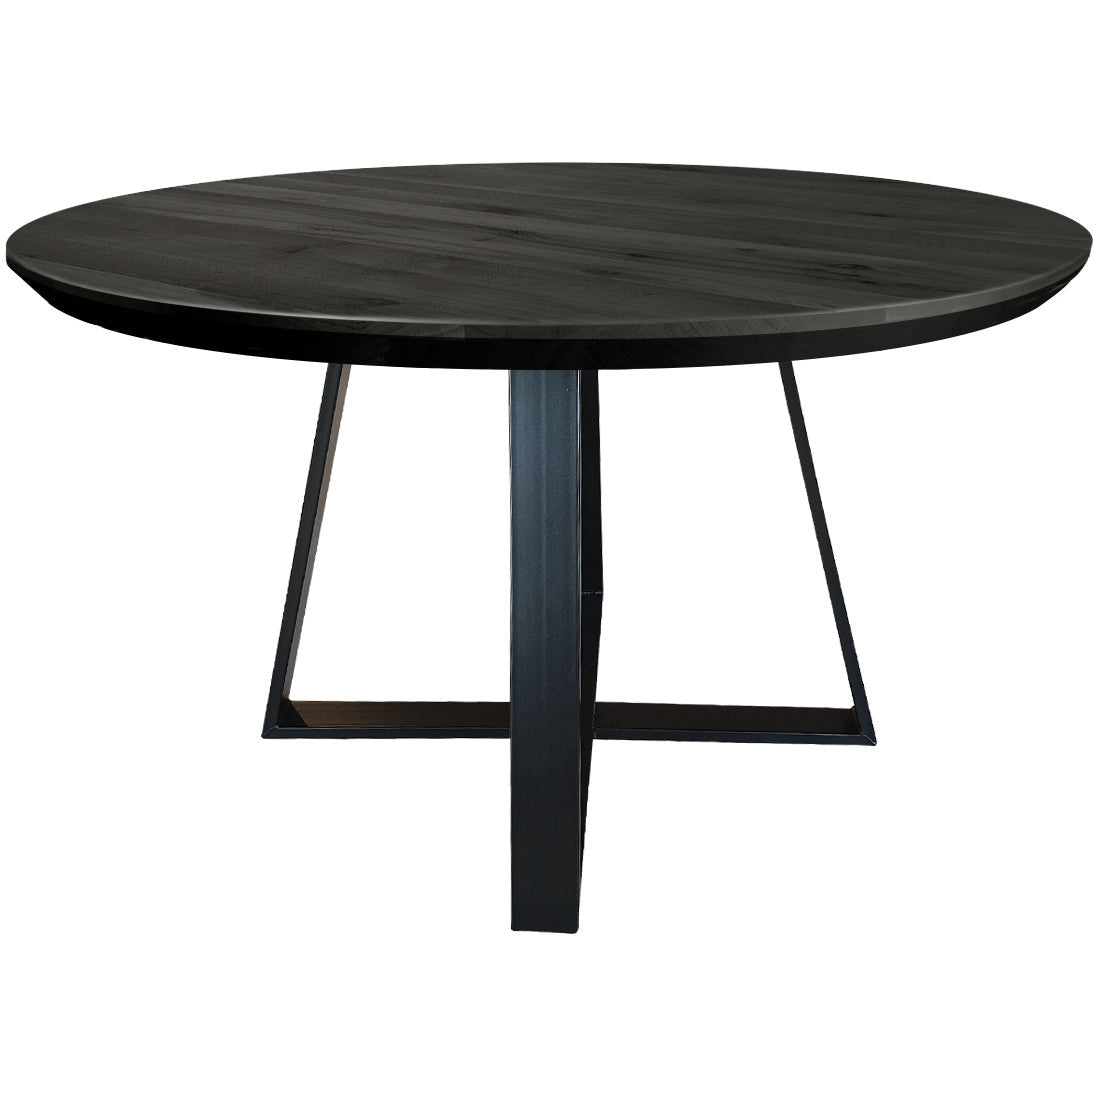 Dining table | Round | Black | Oak wood | Lacquered Cross Leg |